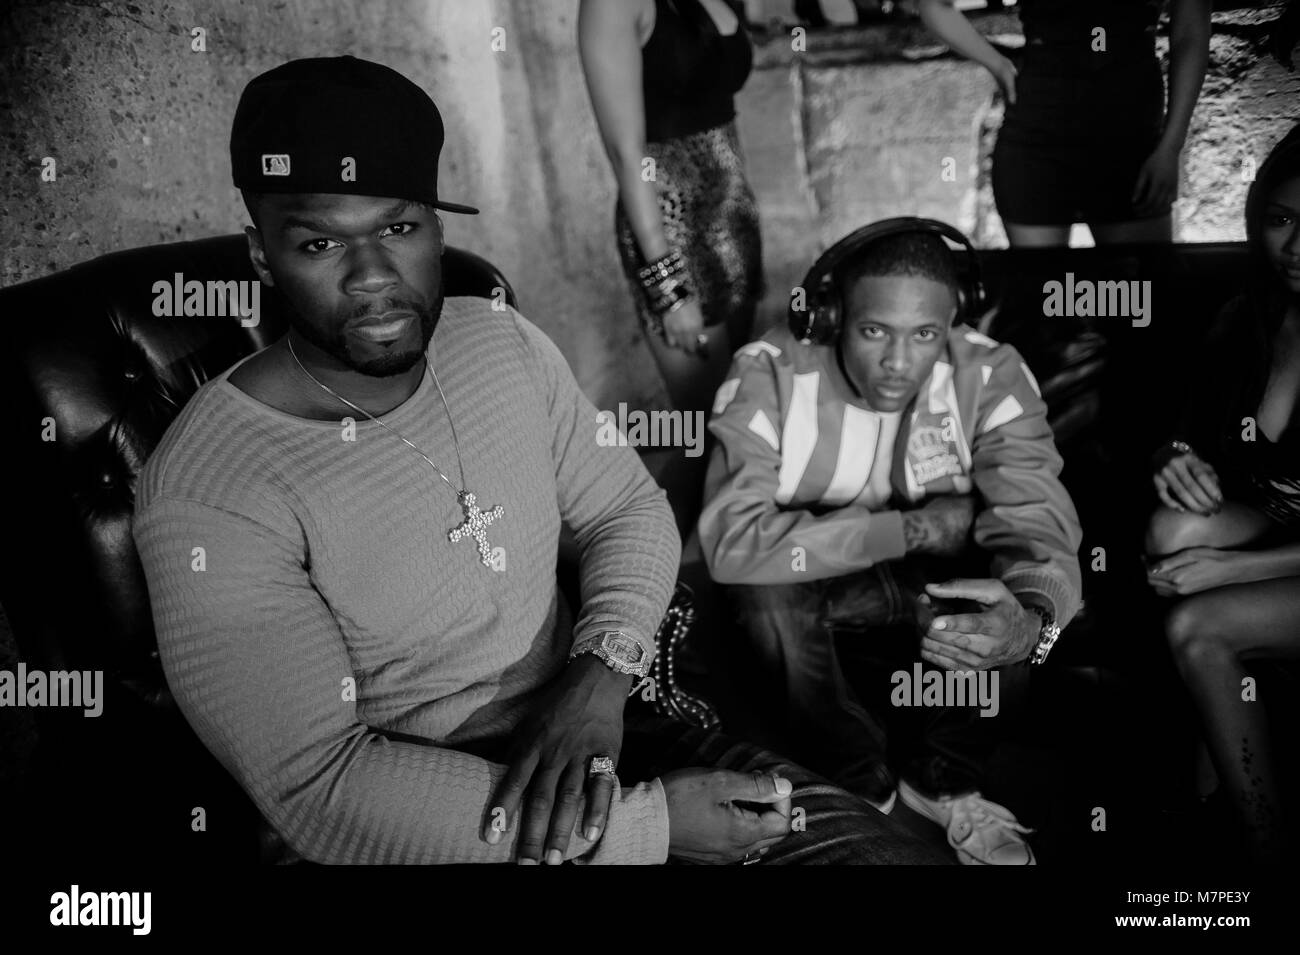 (L-R) 50 Cent & YG portrait on-set at the 'Toot It & Boot It Remix' Music Video on November 18, 2010 in Los Angeles. Stock Photo